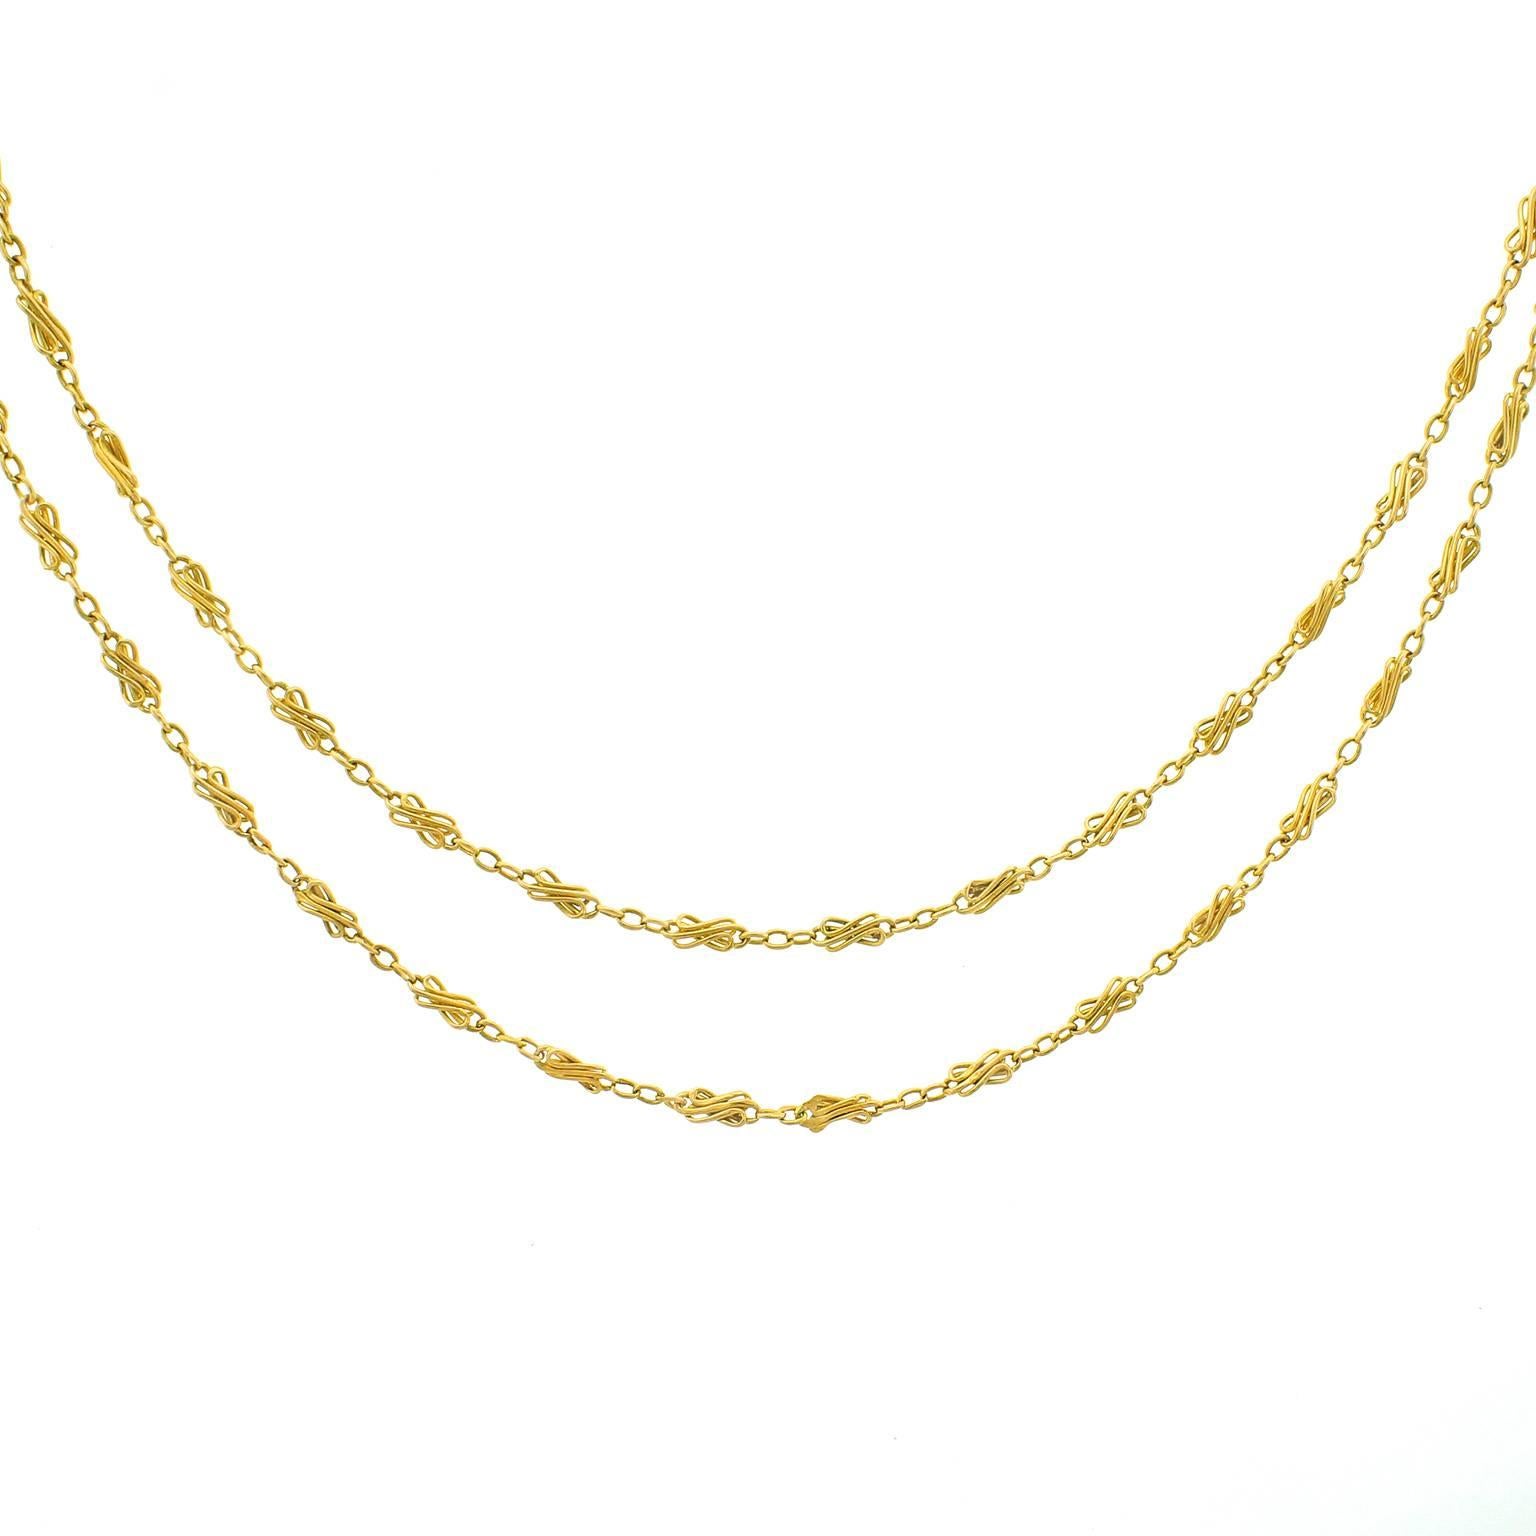 Antique 64-inch French Necklace 2